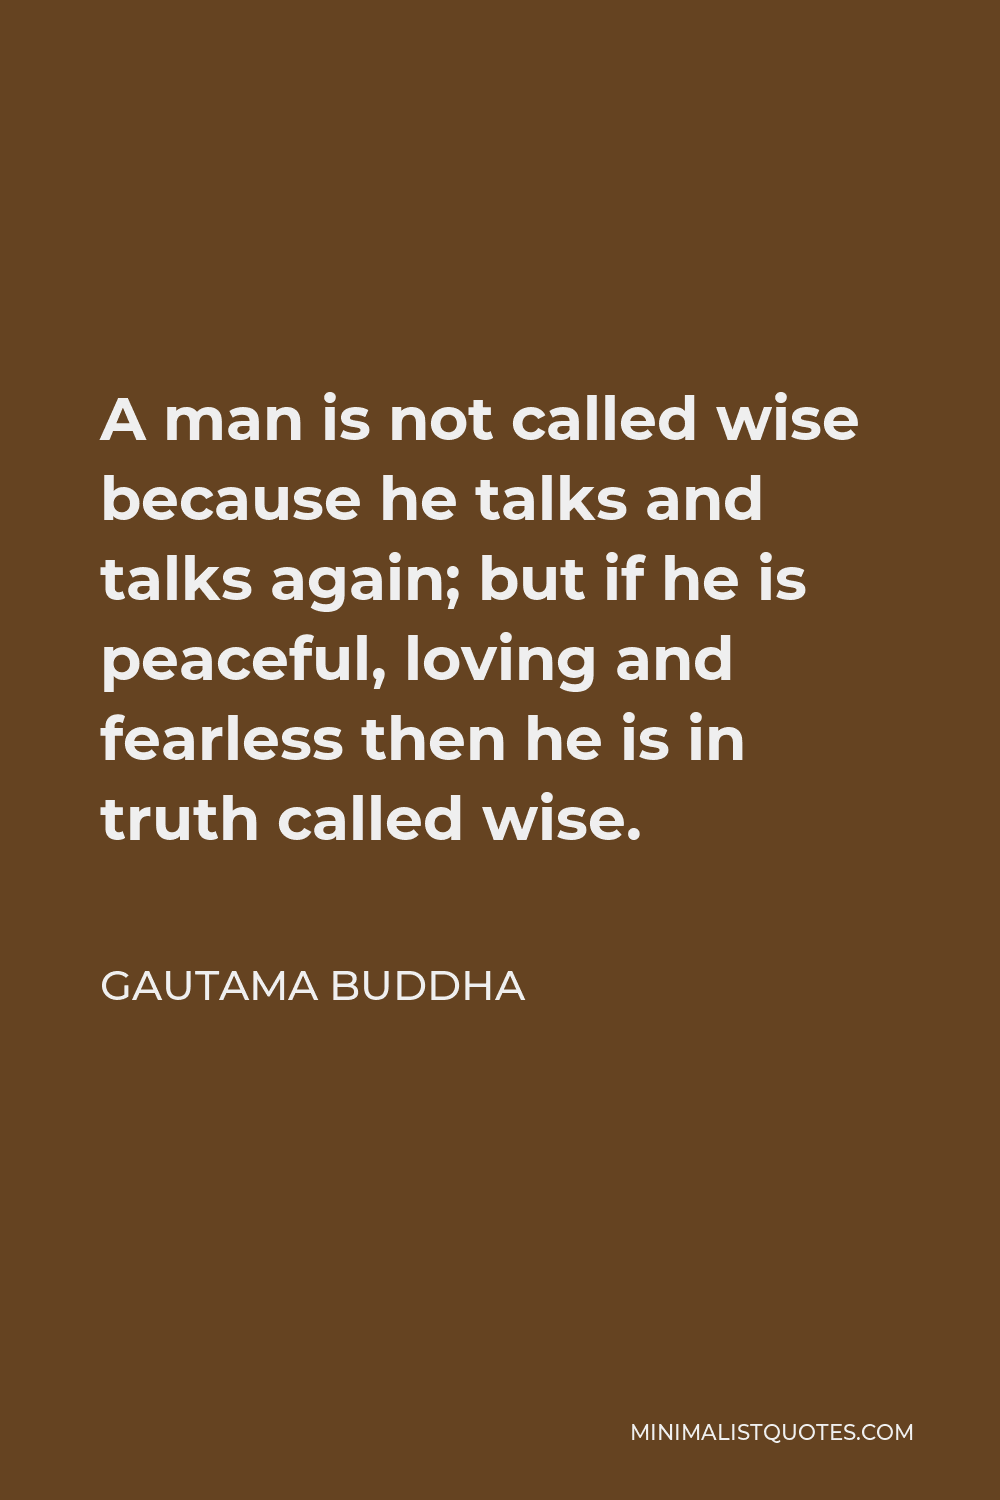 Gautama Buddha Quote - A man is not called wise because he talks and talks again; but if he is peaceful, loving and fearless then he is in truth called wise.